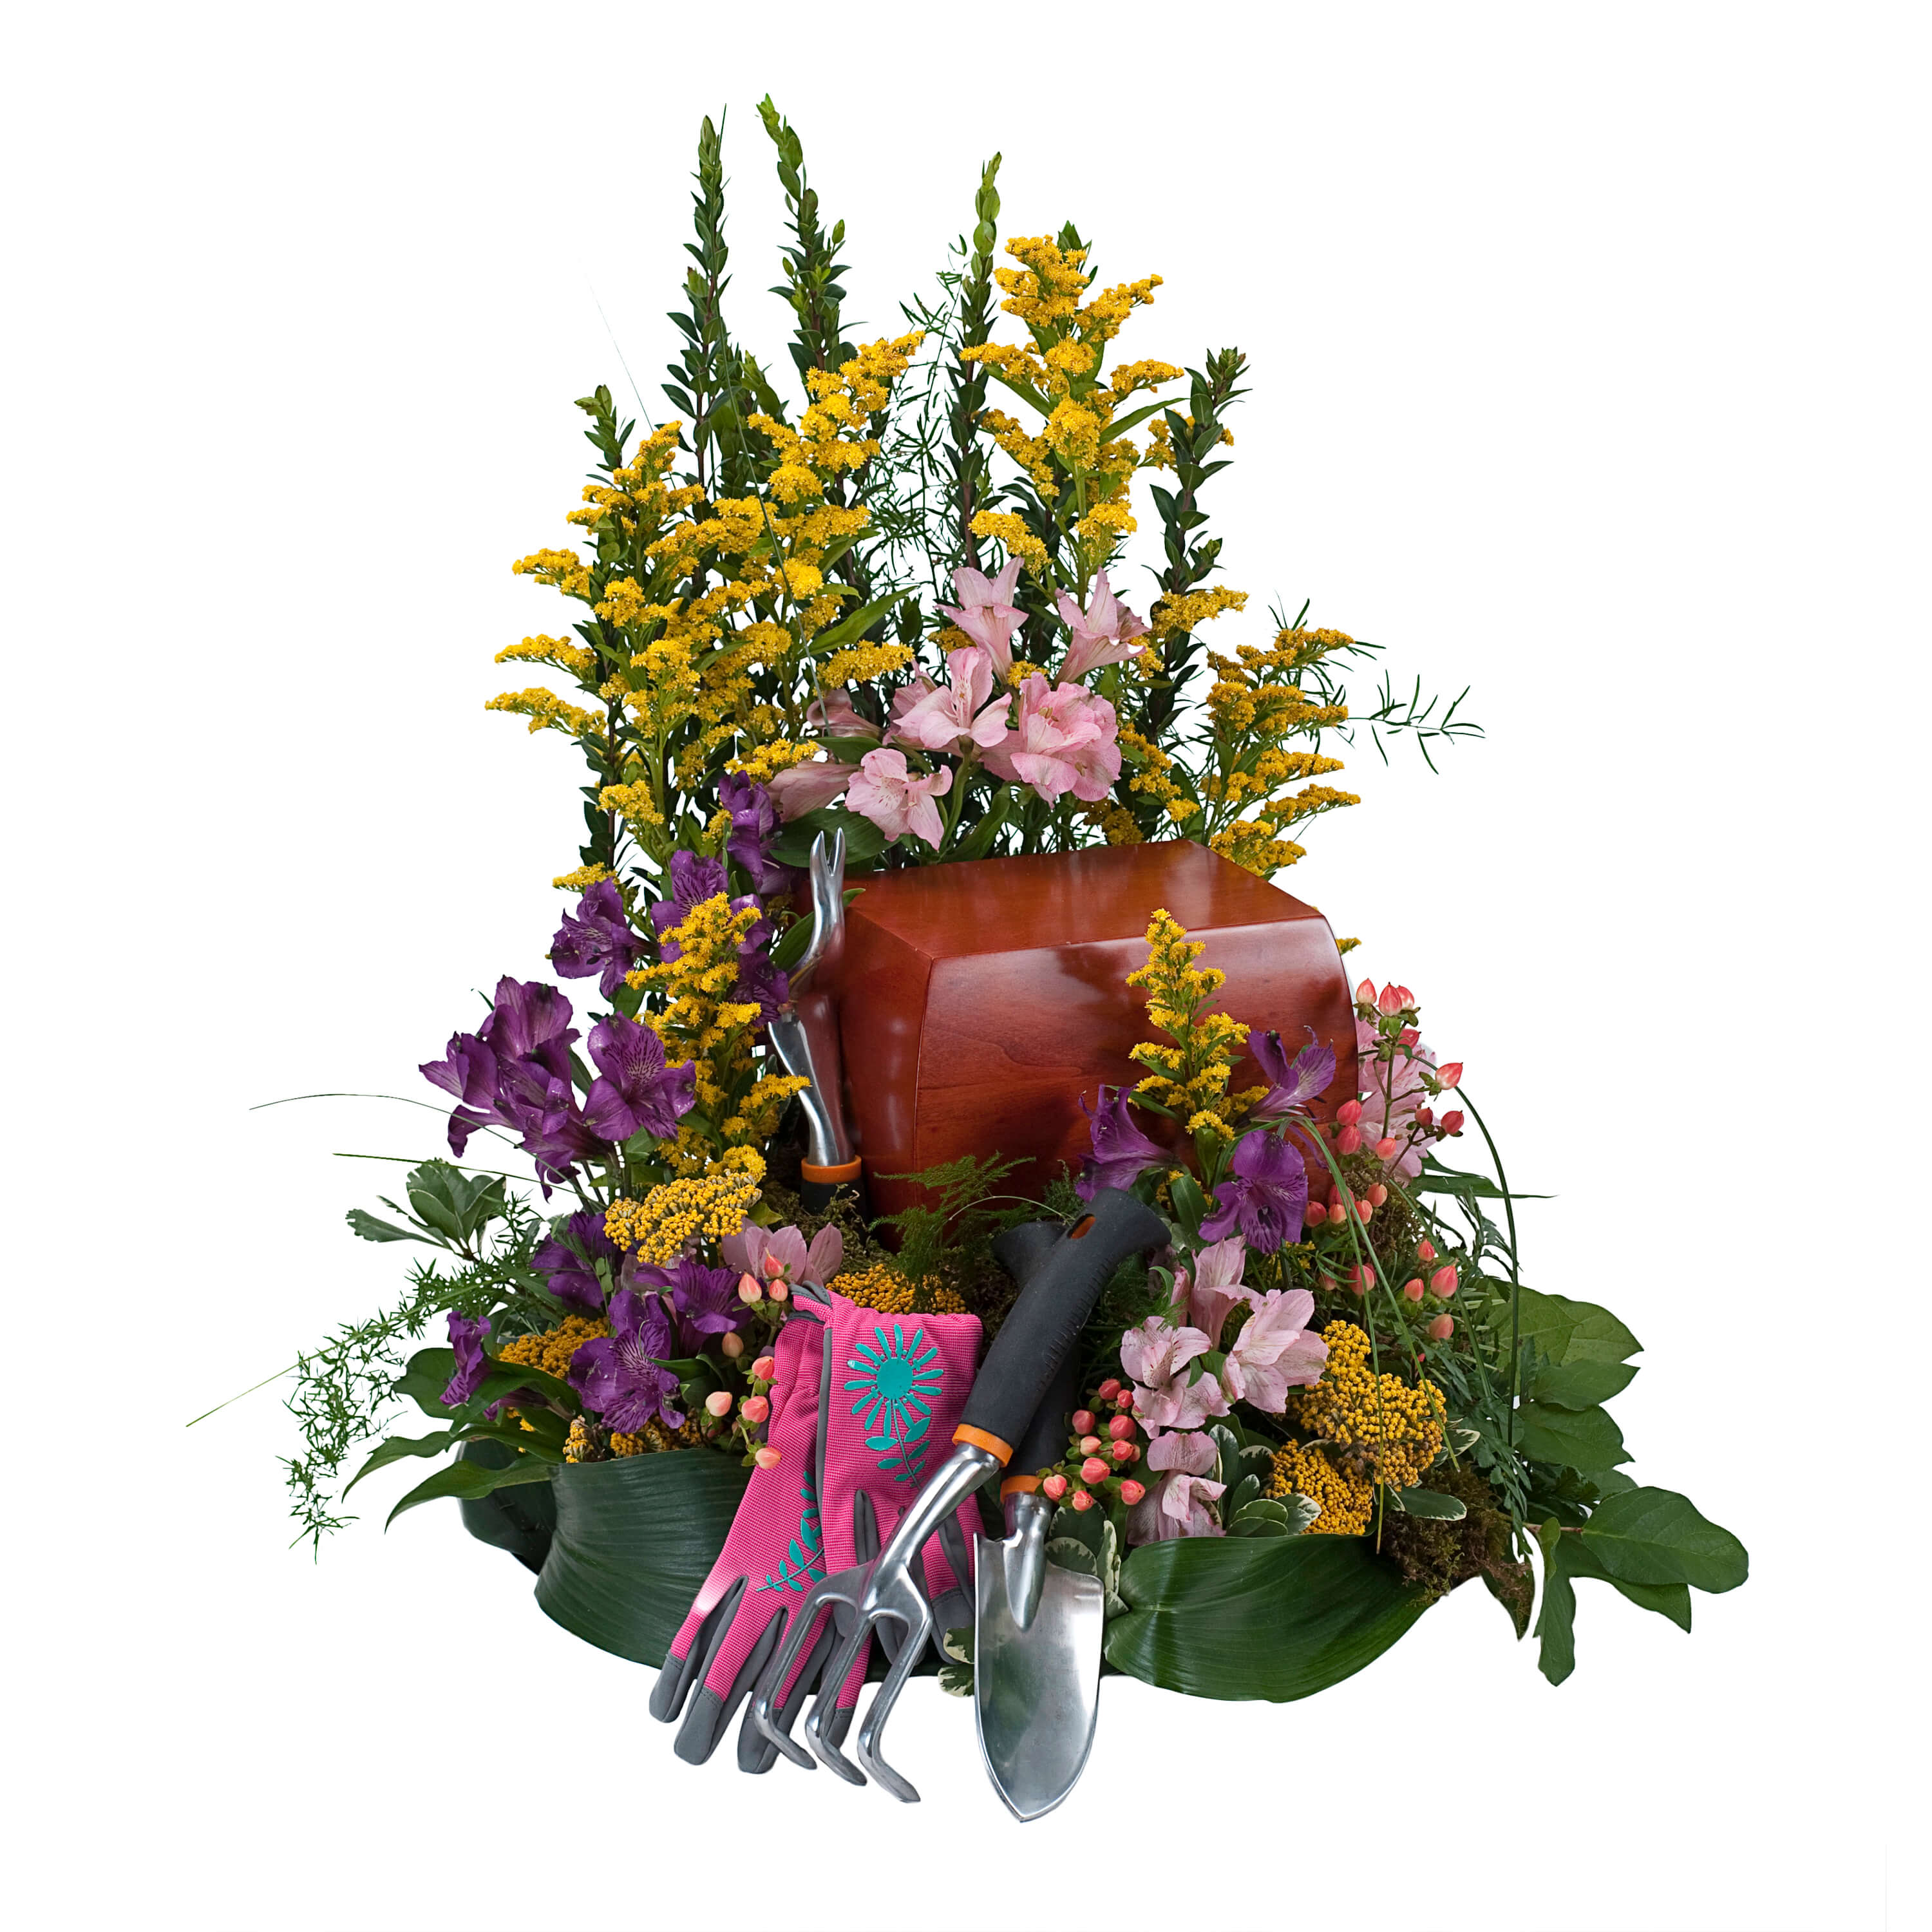 Heavenly Gardener - This personalized tribute of beautiful flowers will reflect the garden of your loved one.